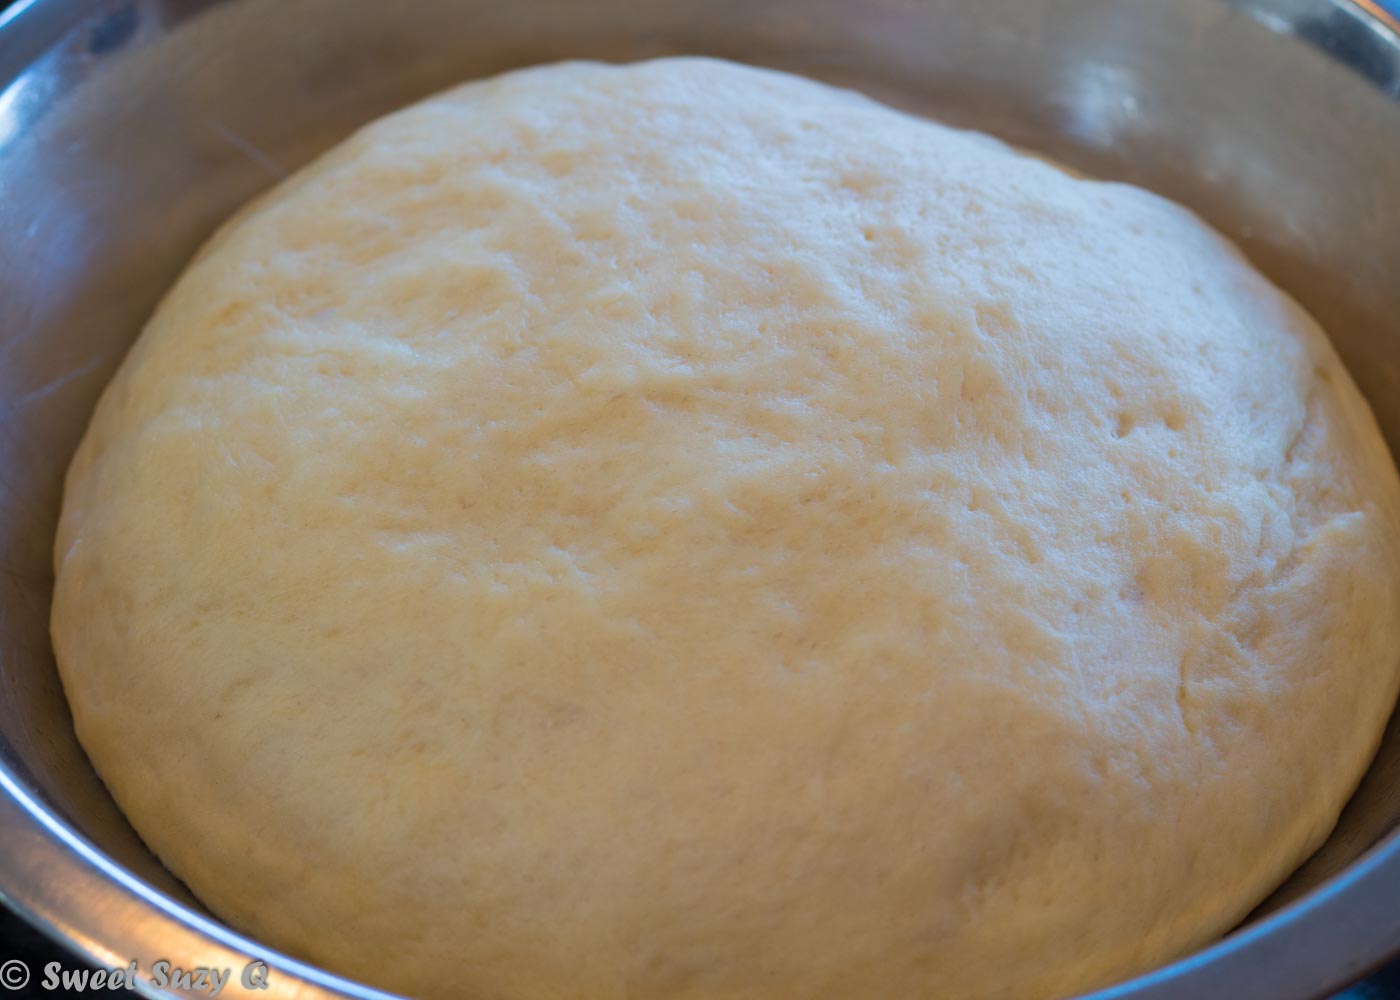 Doubled dough after the rise